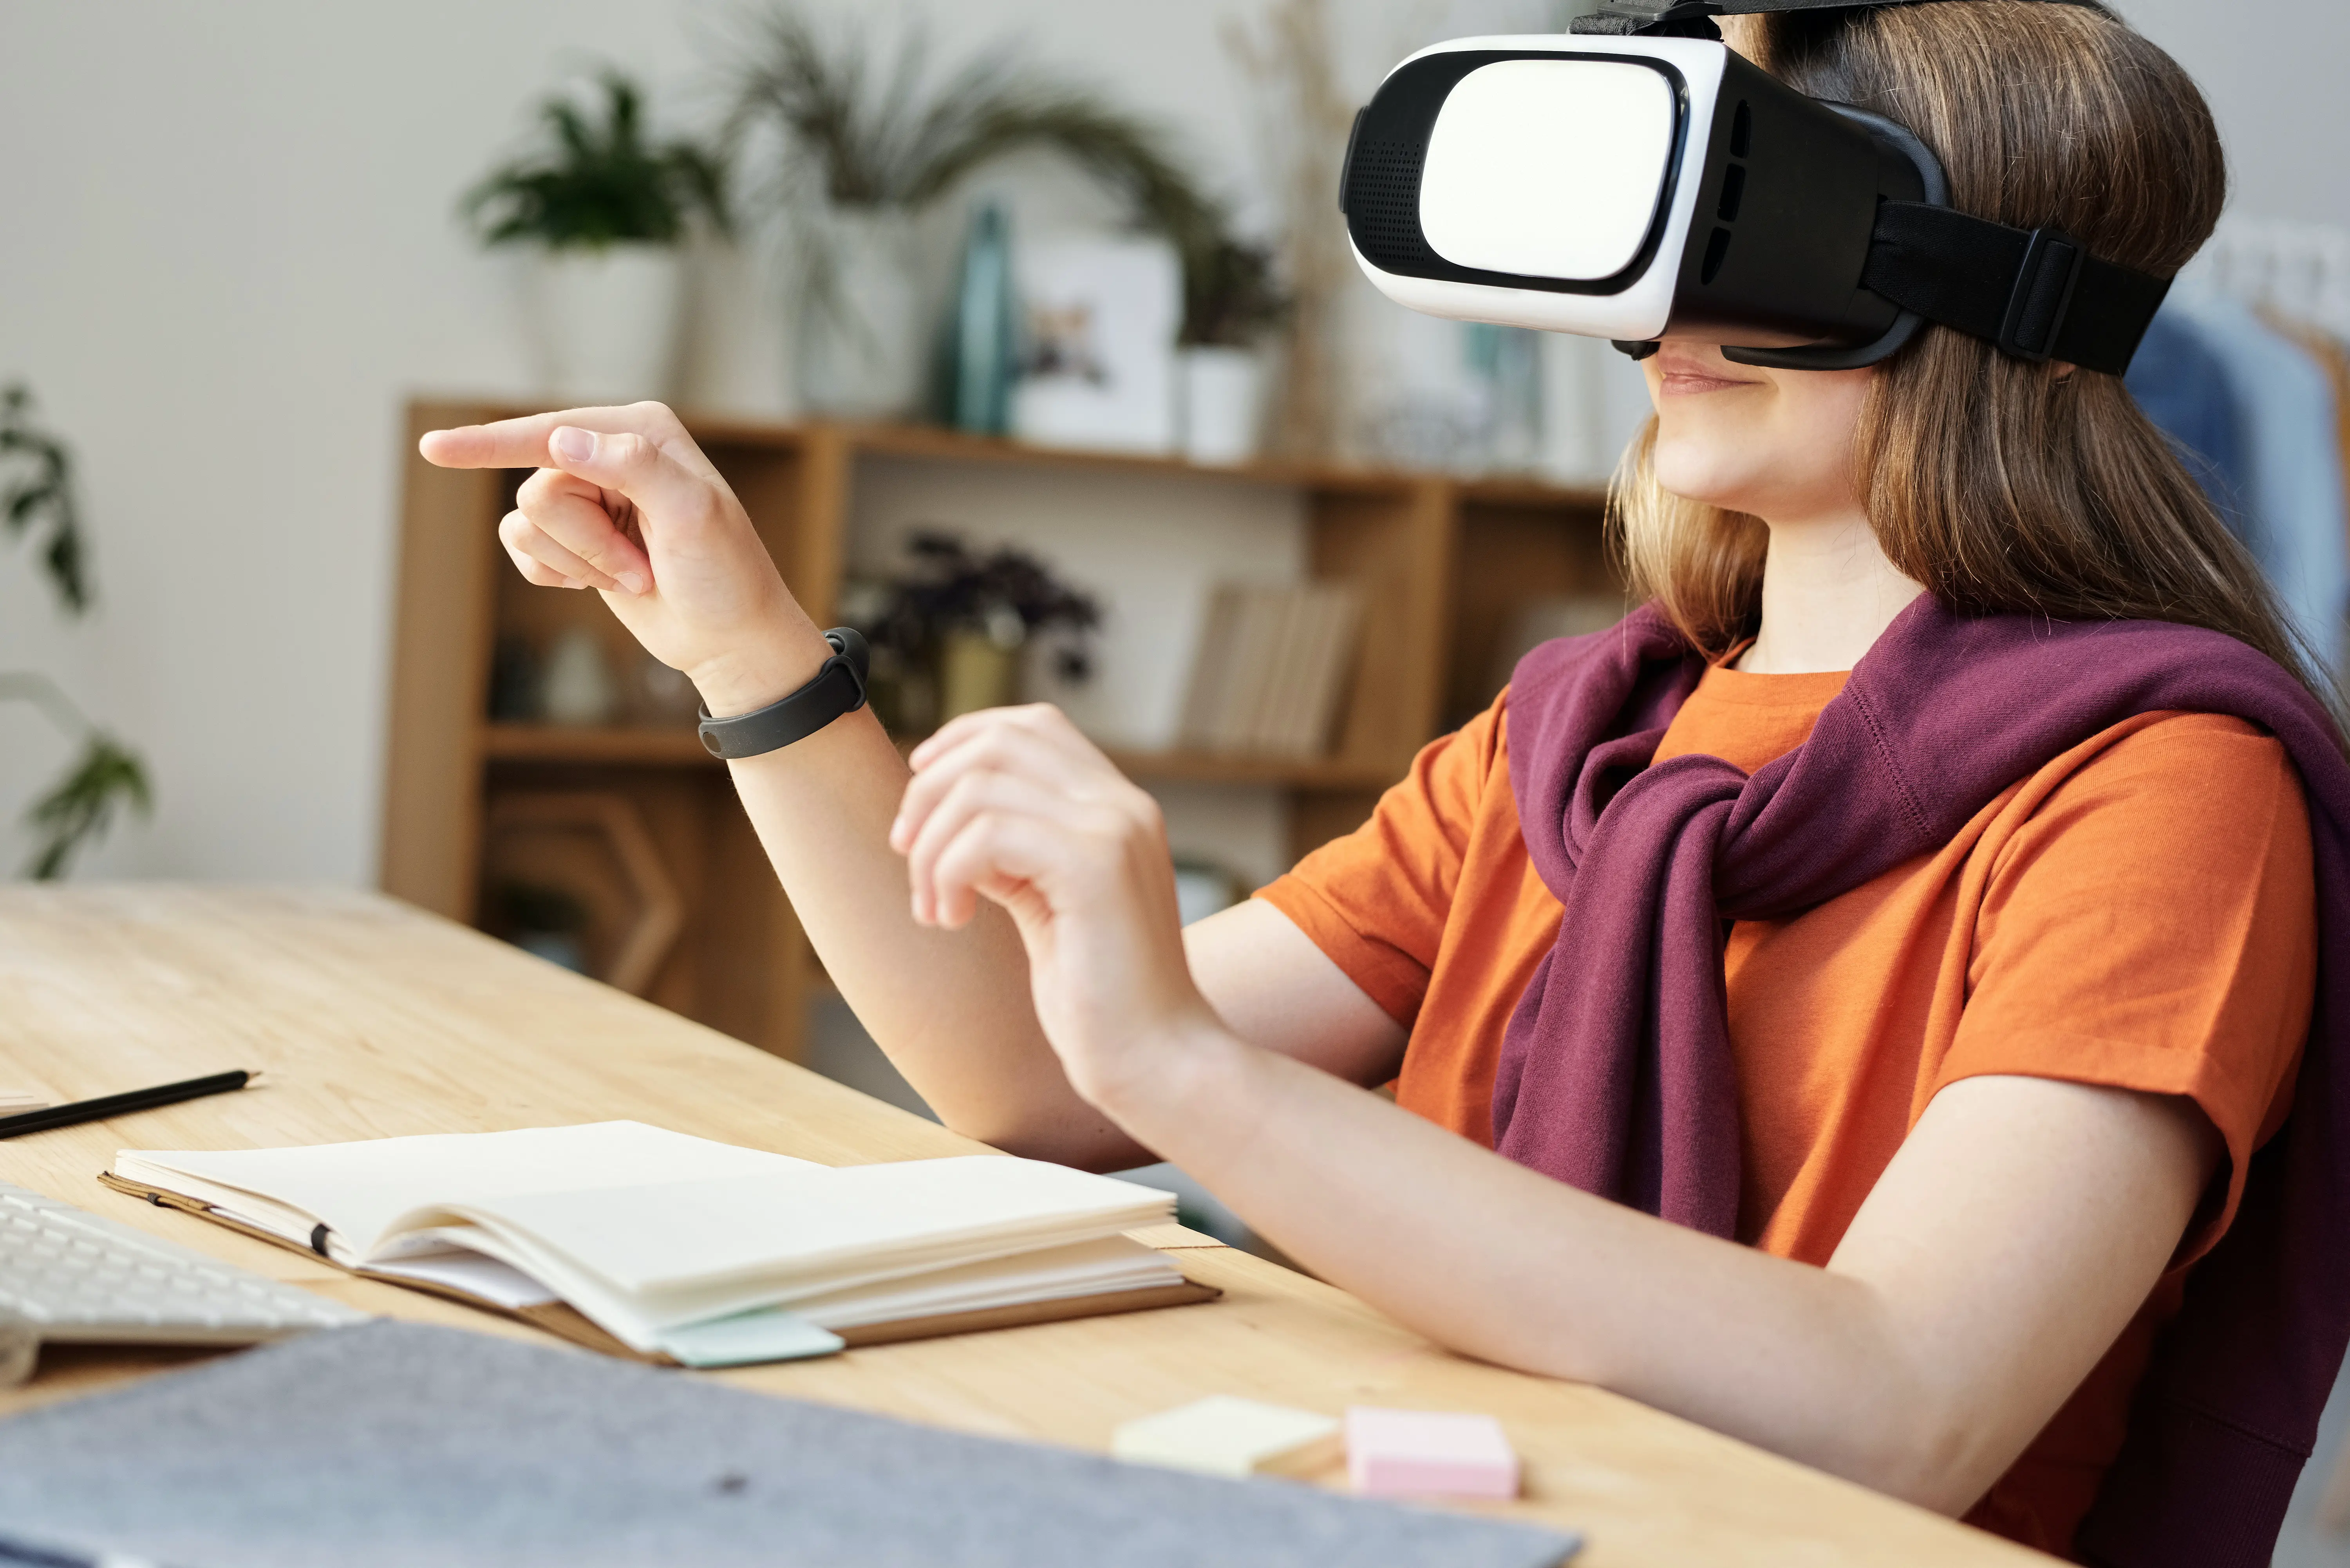 EON Reality and Eduvos Partner to Bring AI-Powered XR Solutions to South Africa